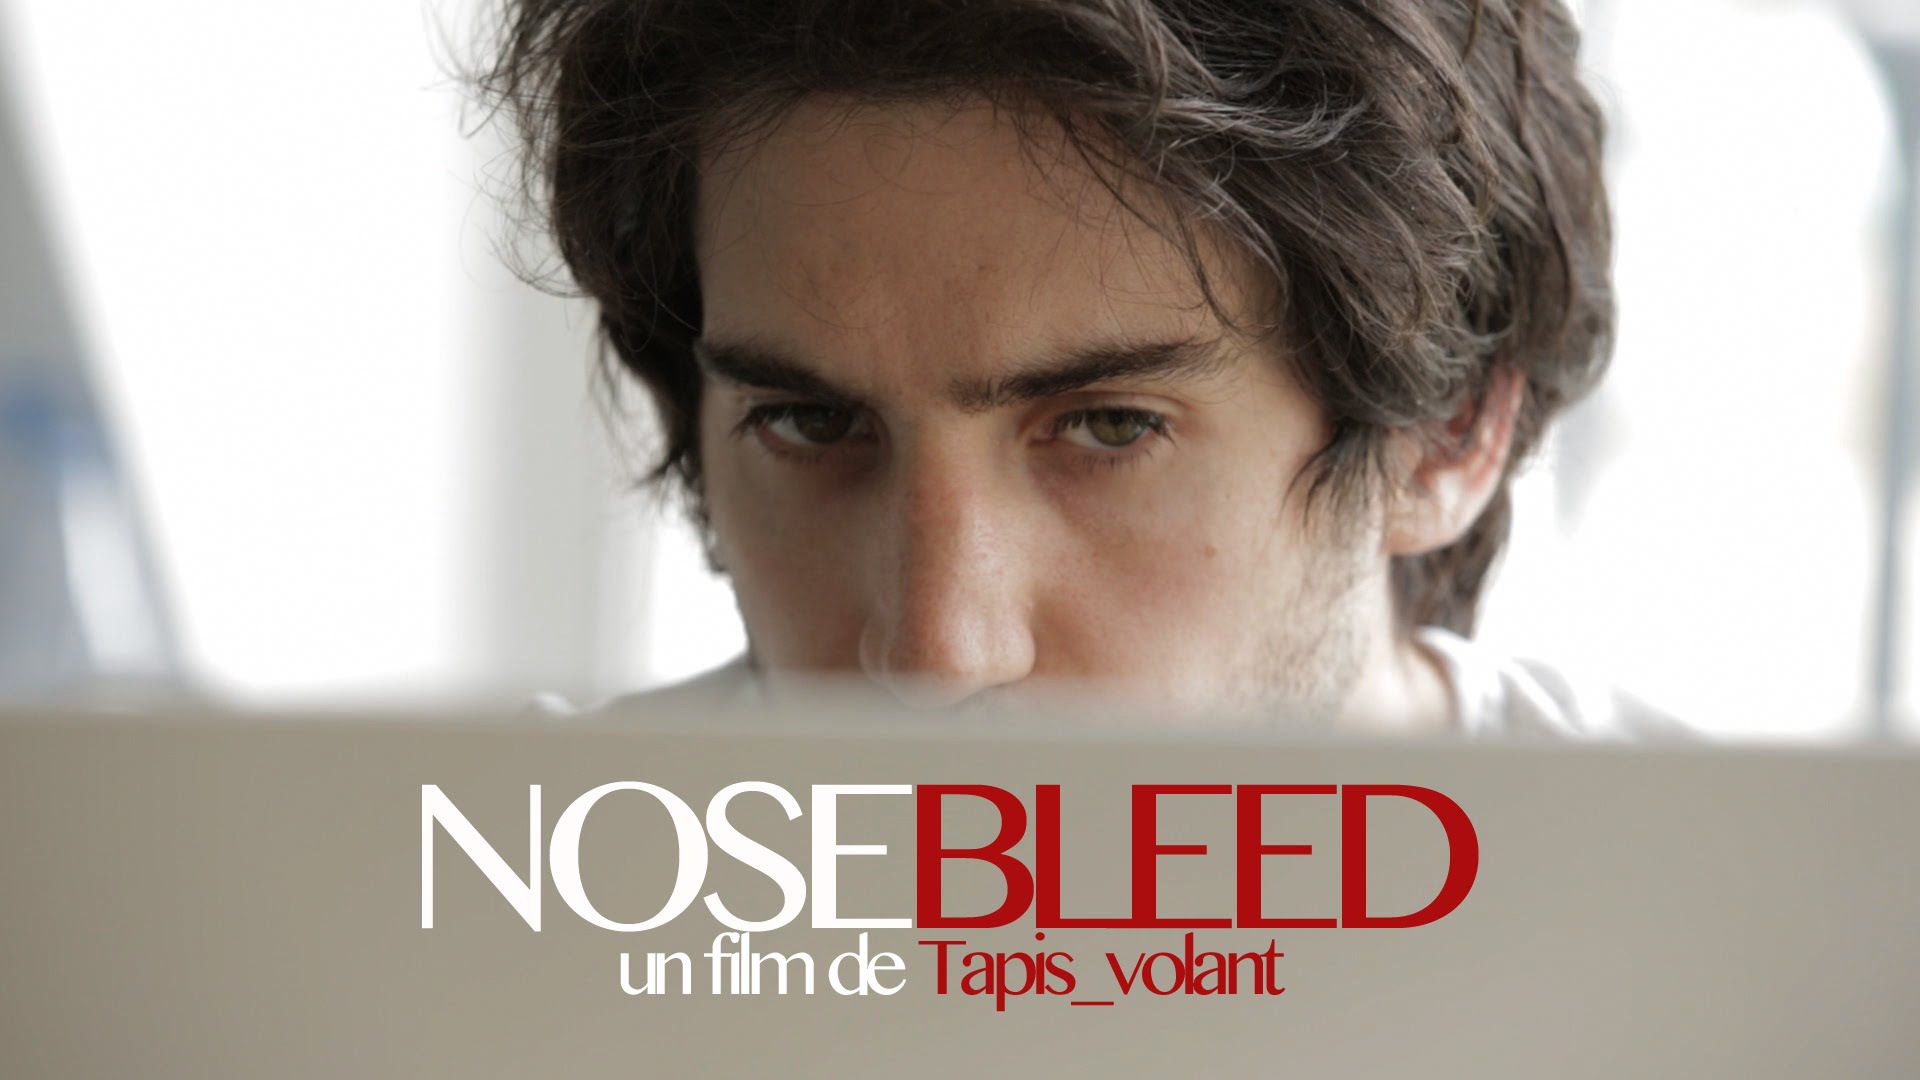 Nosebleed - Documentaire (2014) streaming VF gratuit complet